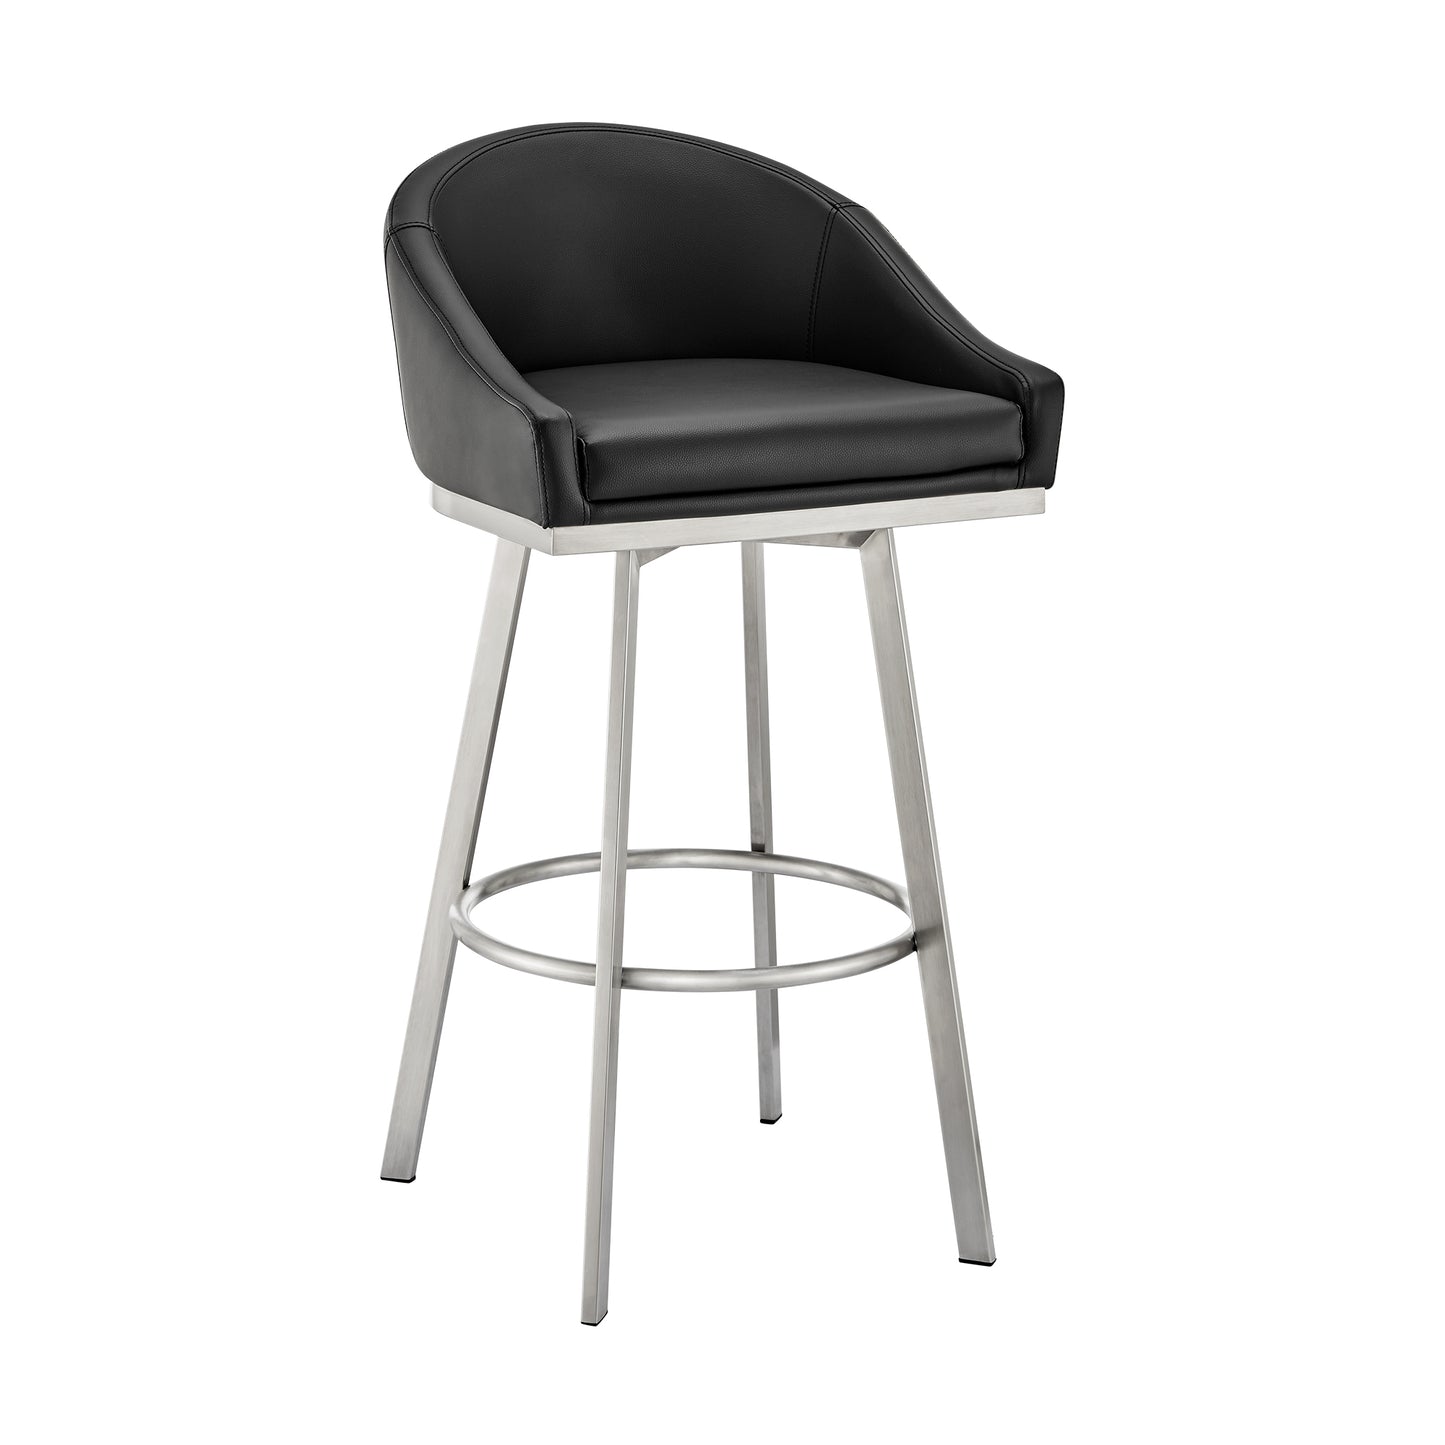 Eleanor 26" Swivel Counter Stool in Brushed Stainless Steel and Black Faux Leather